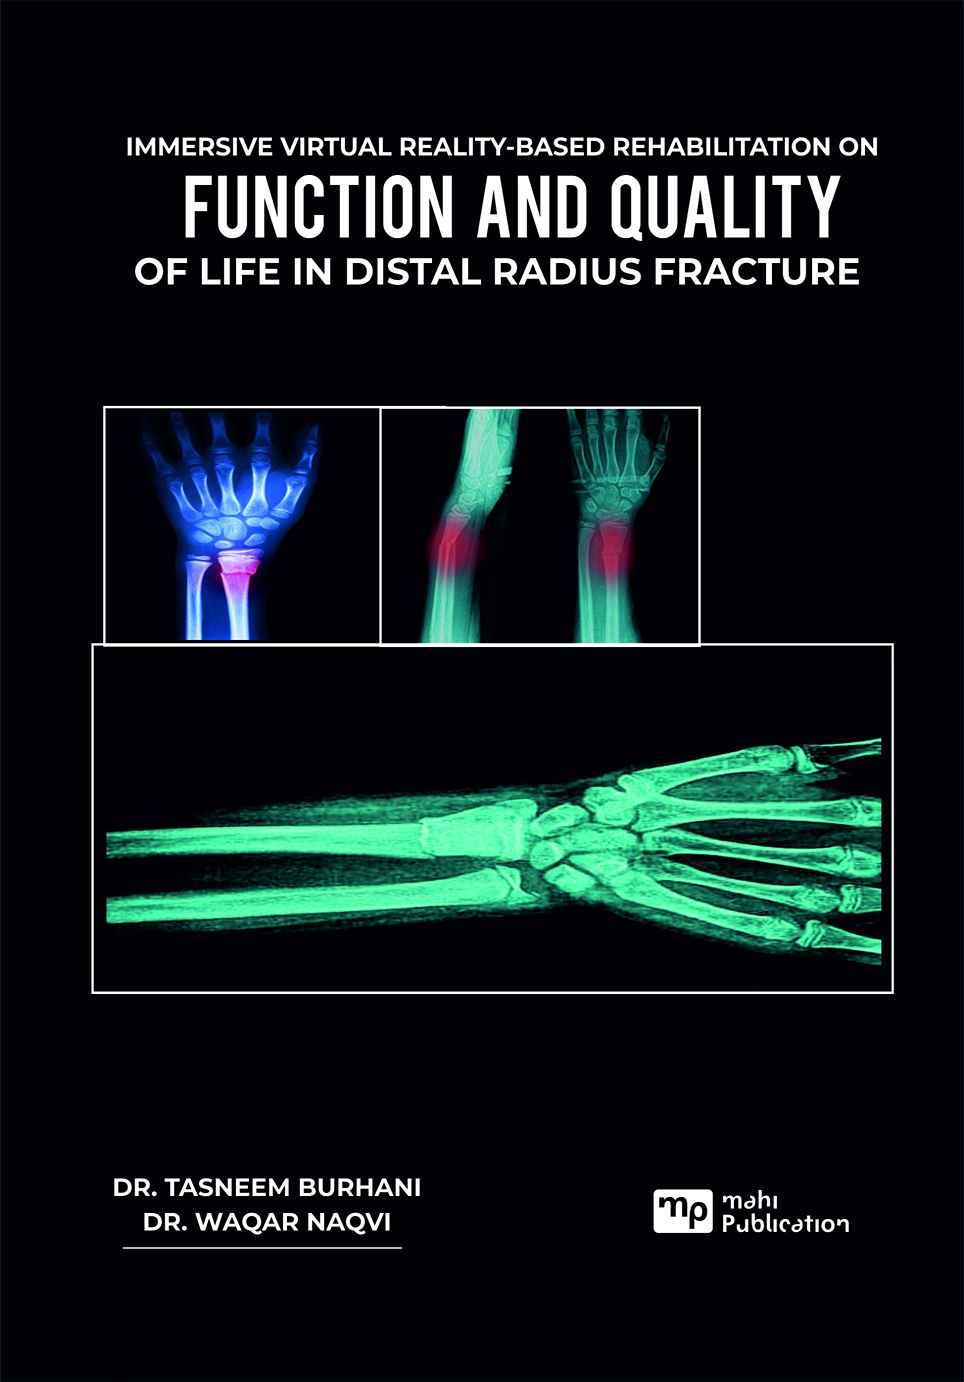 Immersive Virtual Reality-based Rehabilitation on Function and Quality of Life in Distal Radius Fracture